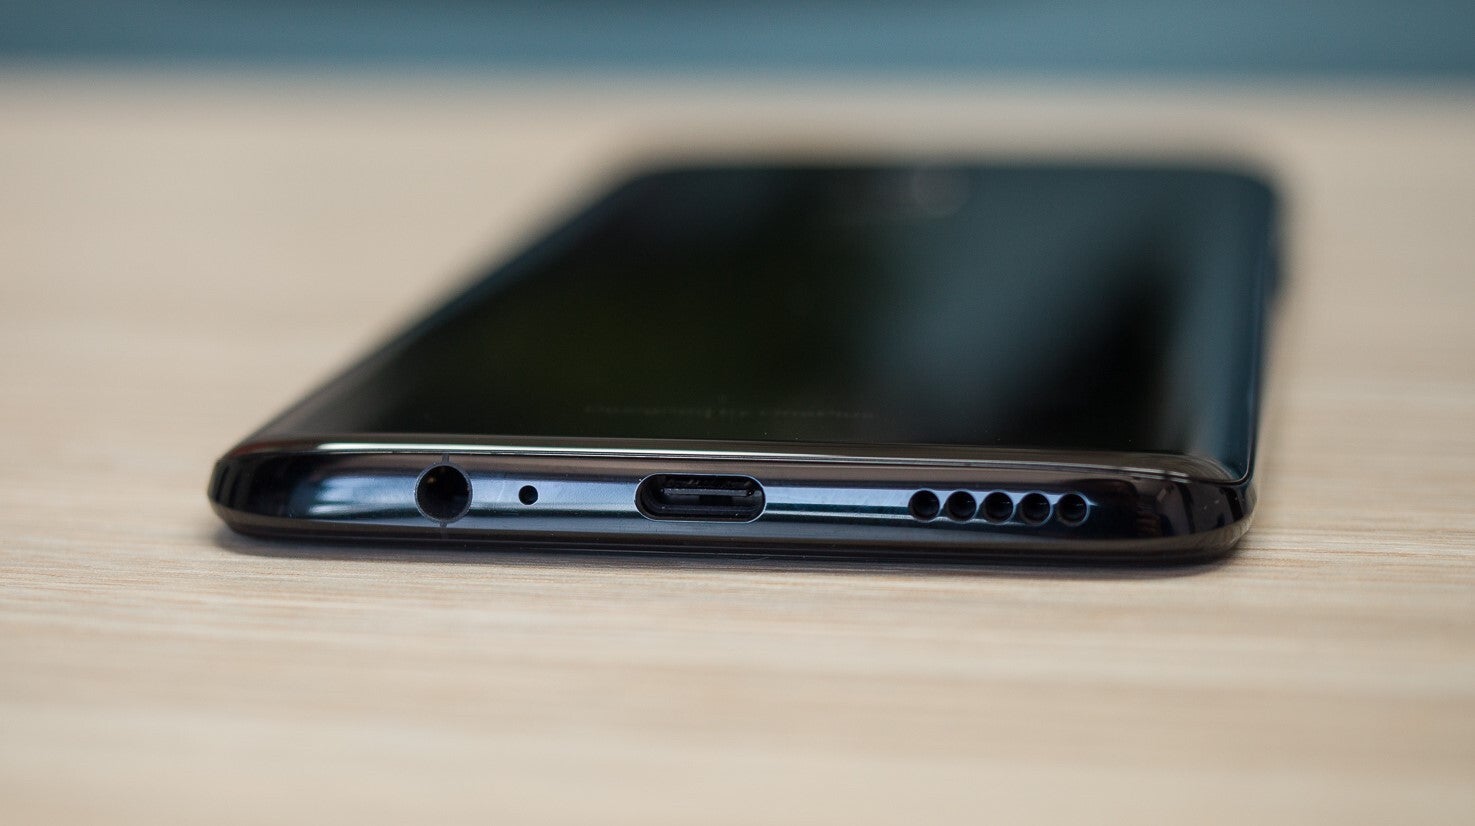 The OnePlus 6 was the last model with a headphone jack - What we want to see from the OnePlus 7T and 7T Pro